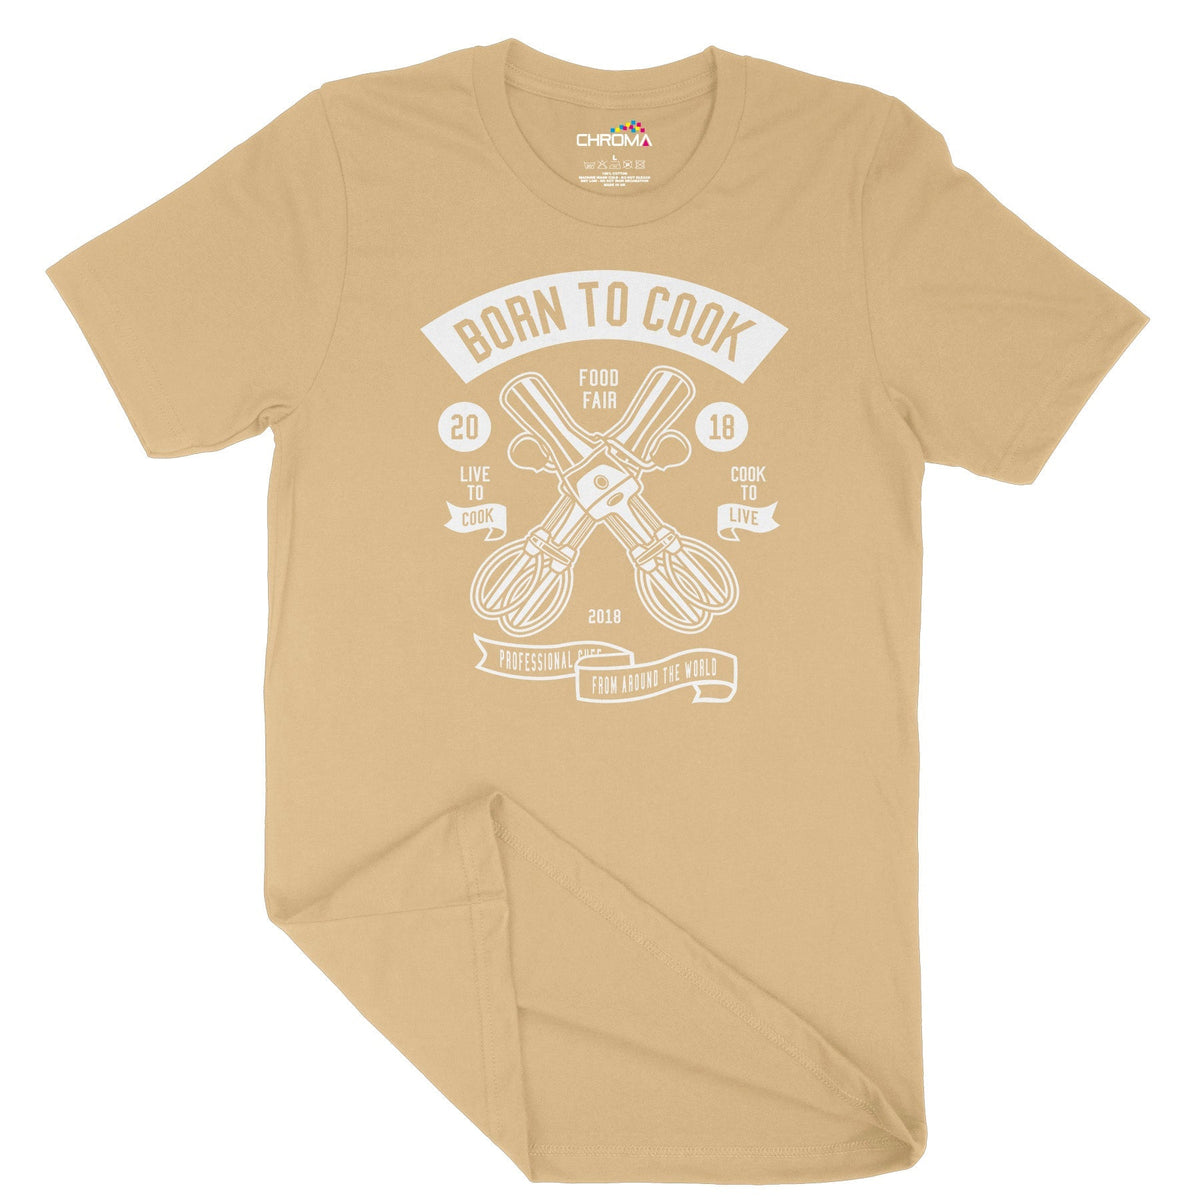 Born To Cook | Vintage Adult T-Shirt | Classic Vintage Clothing Chroma Clothing